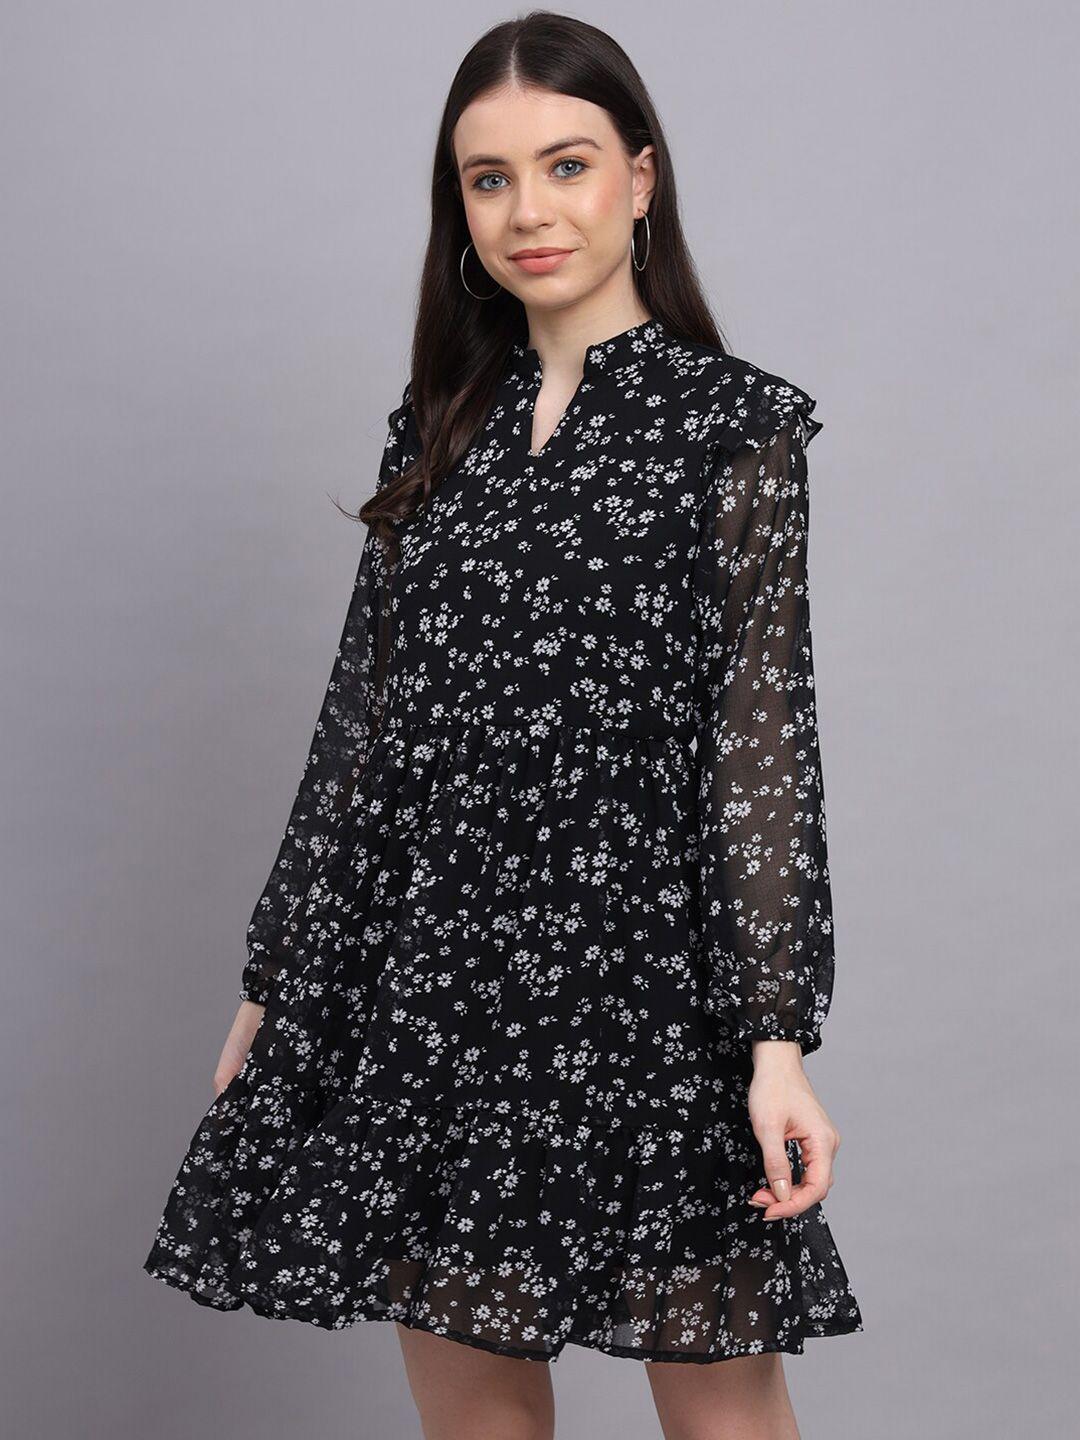 rediscover fashion floral printed puff sleeves gathered fit & flare dress